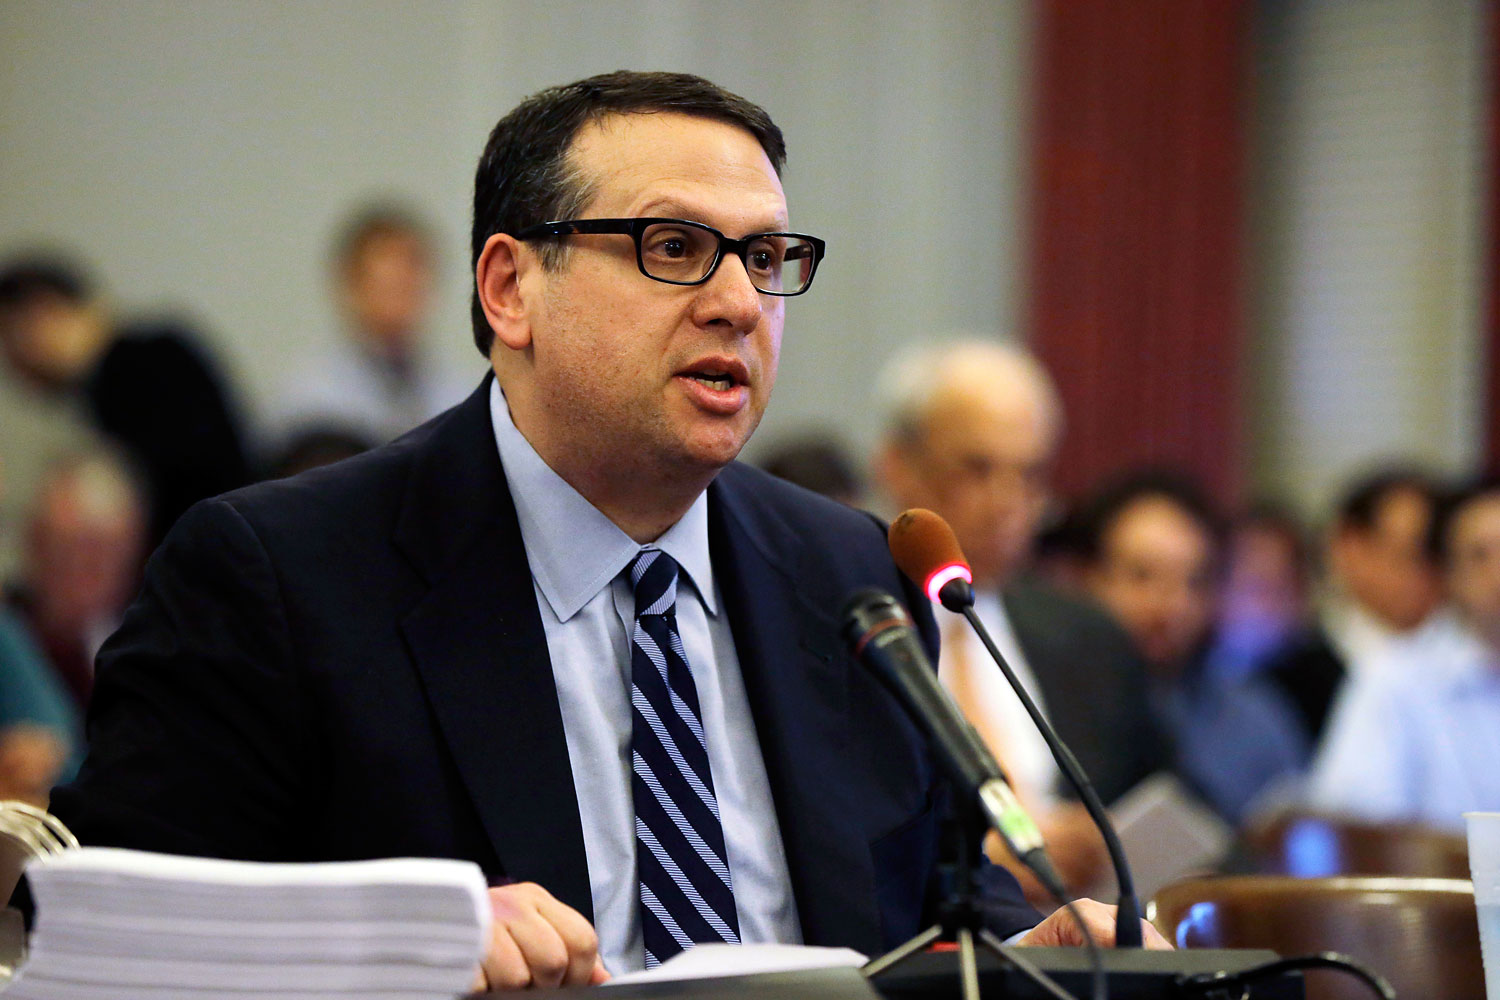 David Wildstein, who was Christie's No. 2 man at the Port Authority, speaks during a hearing at the Statehouse in Trenton, Jan. 9, 2014. (Mel Evans&mdash;AP)